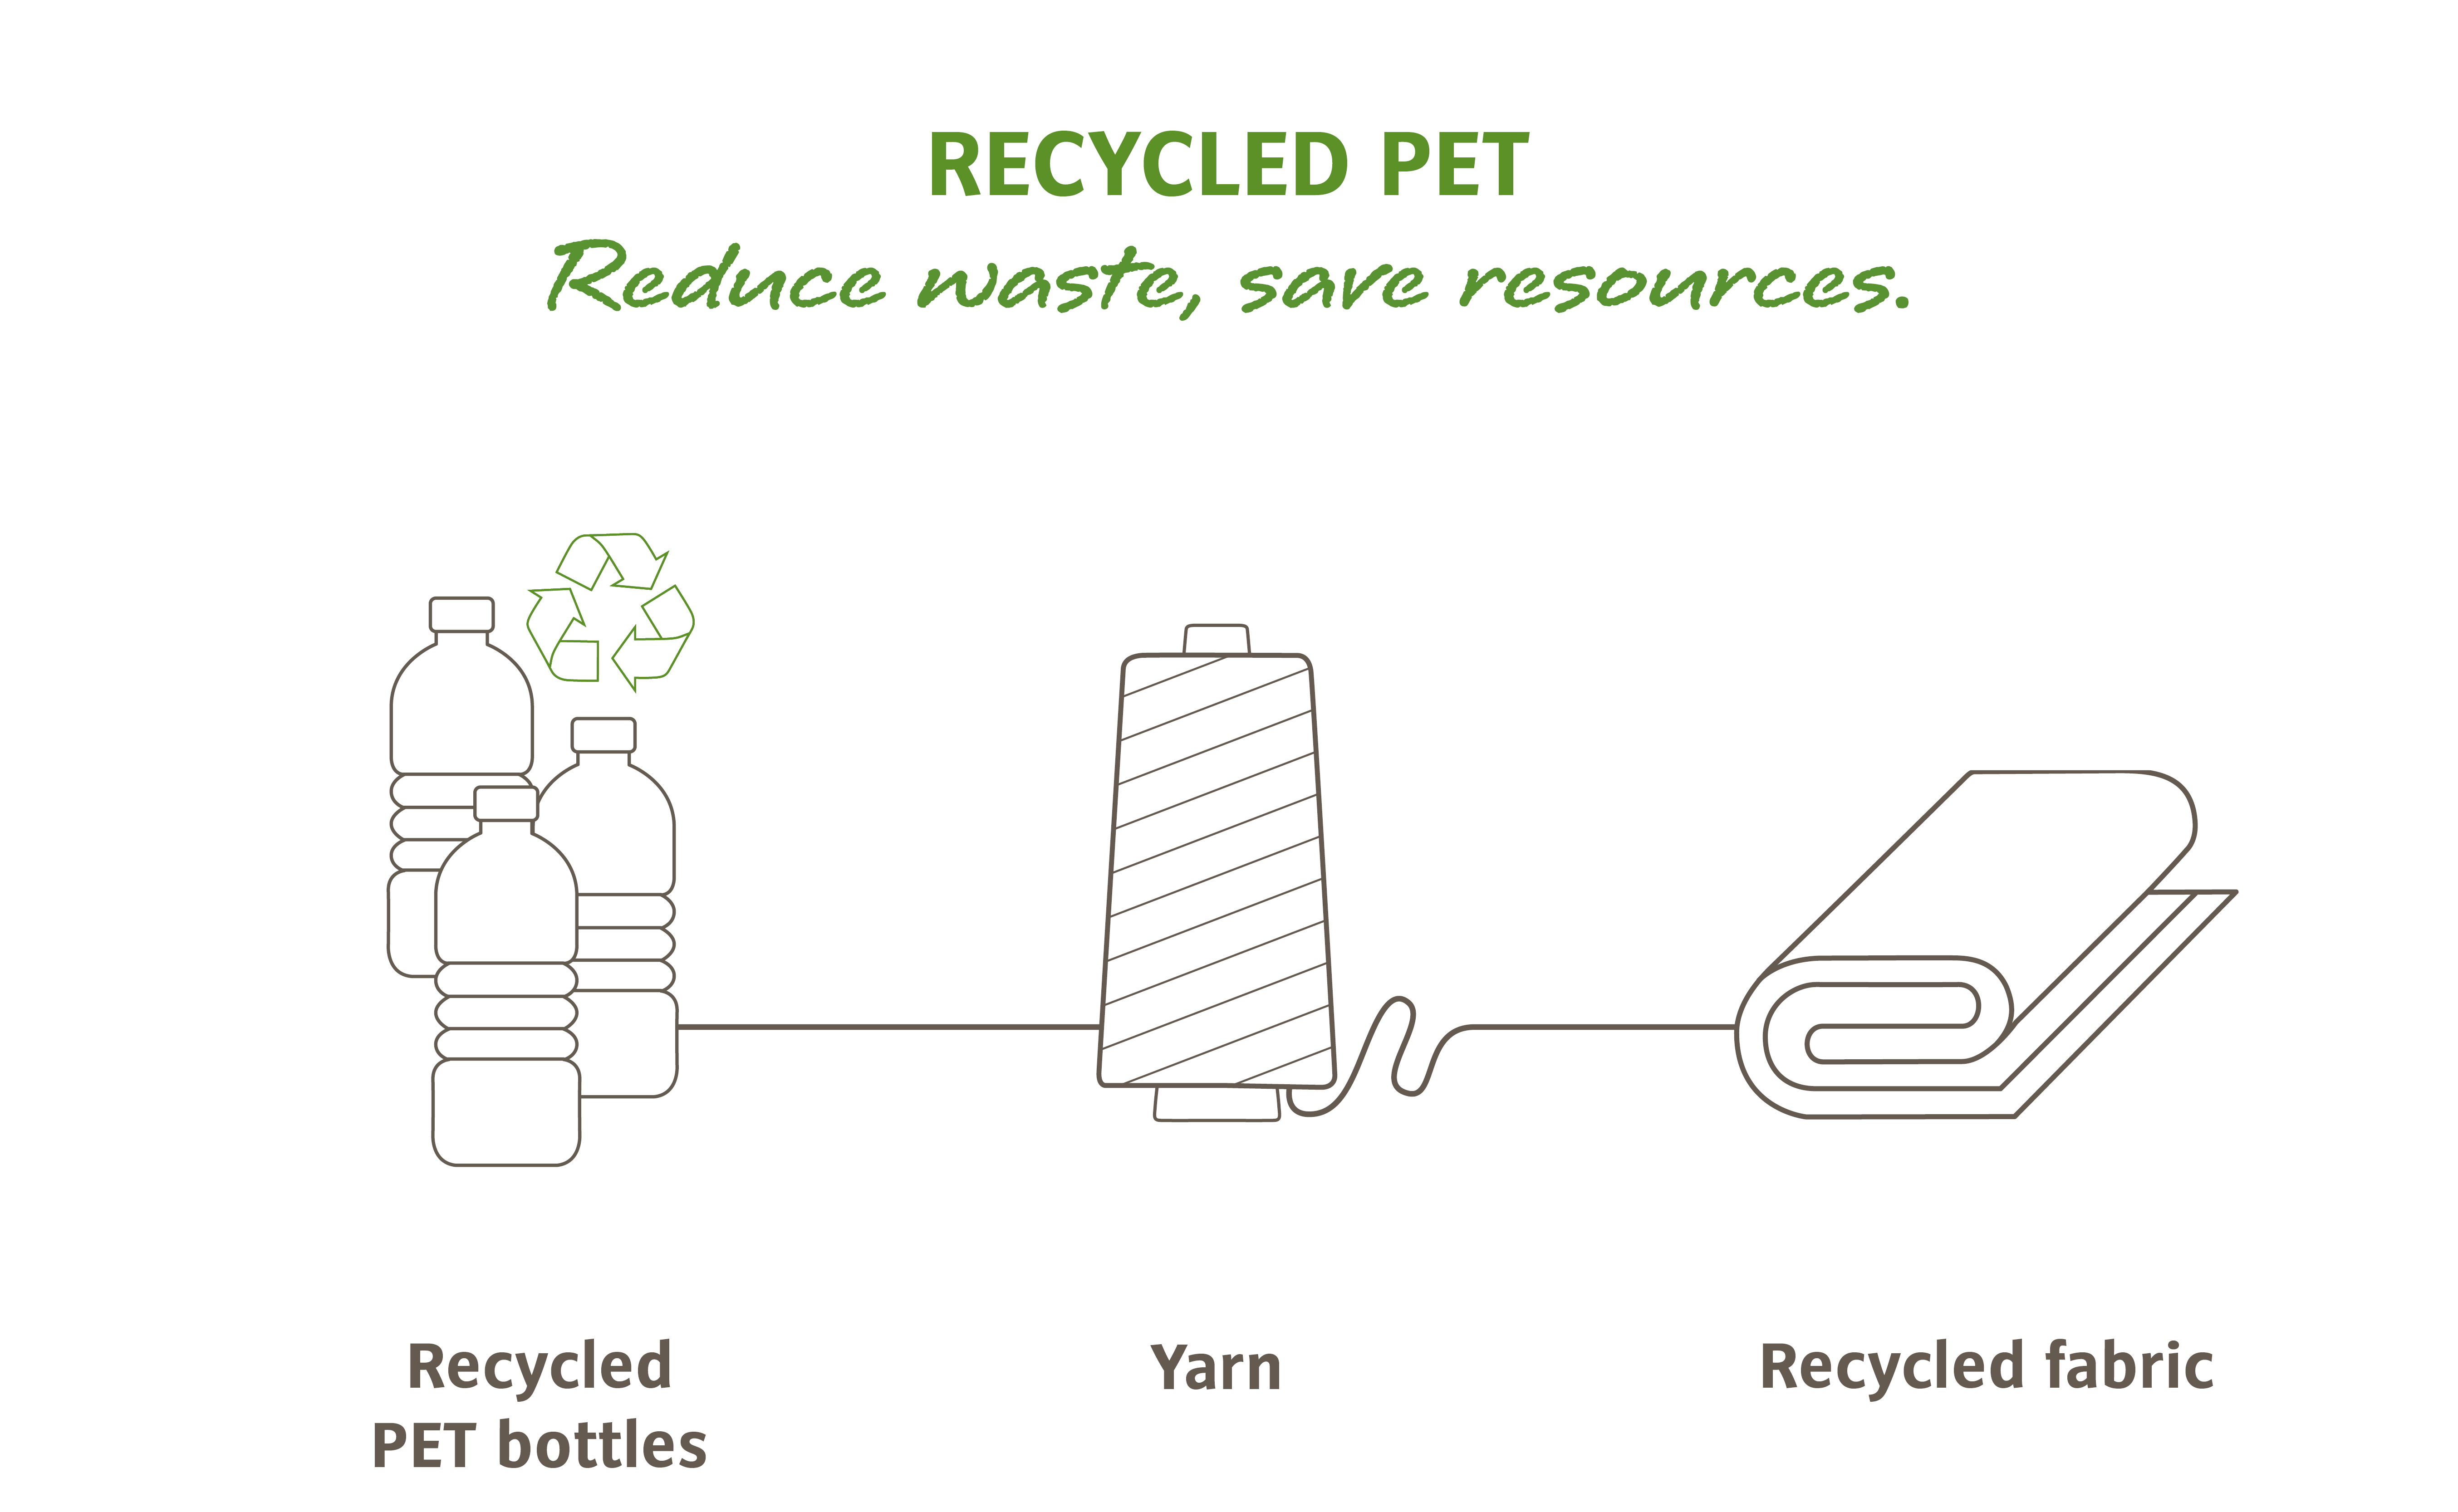 Recycled PET